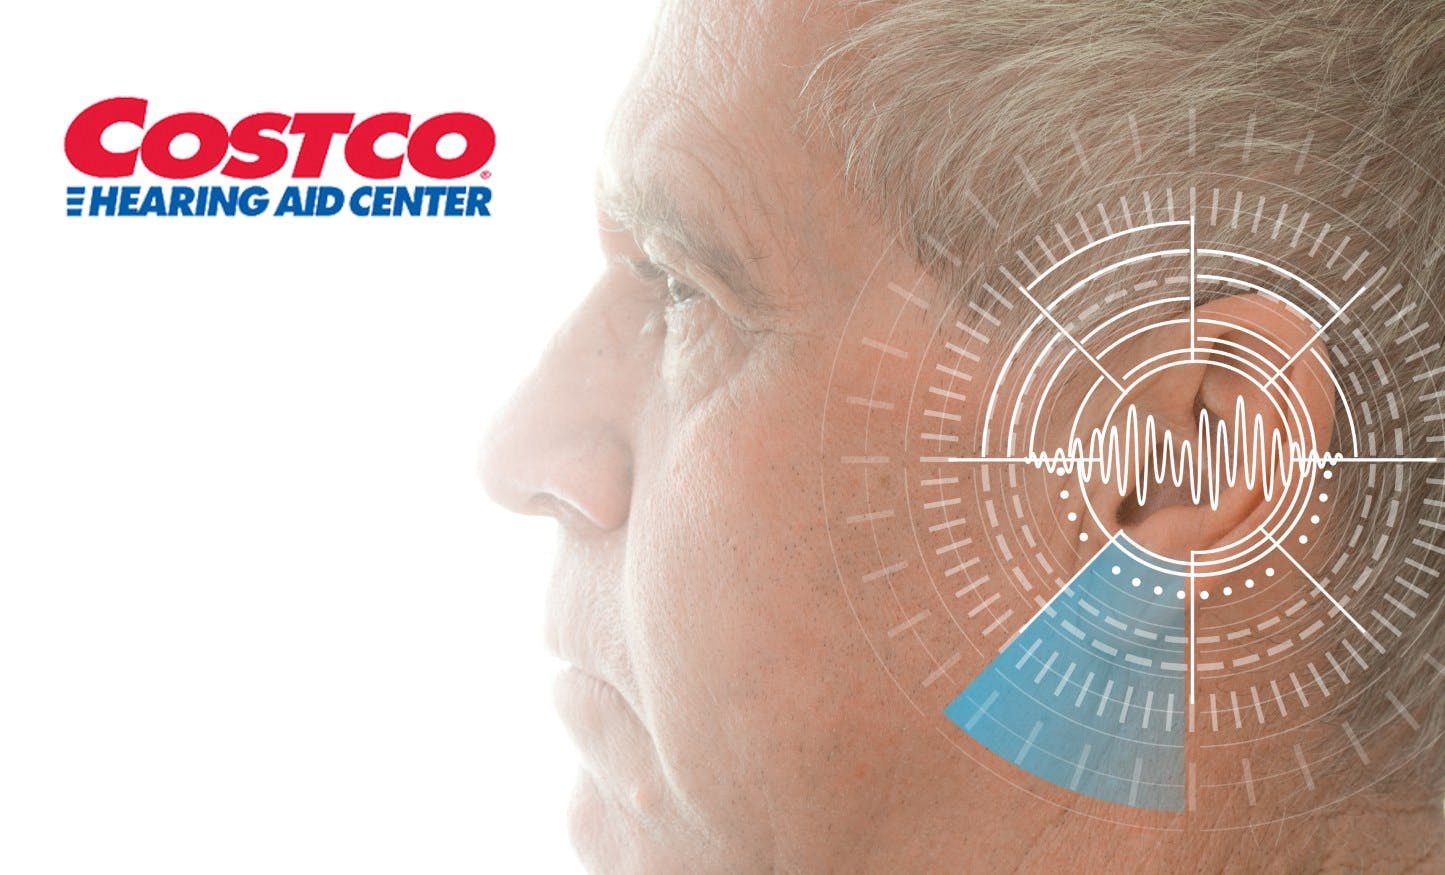 Costco Hearing Aids Review: At Every Costco Store